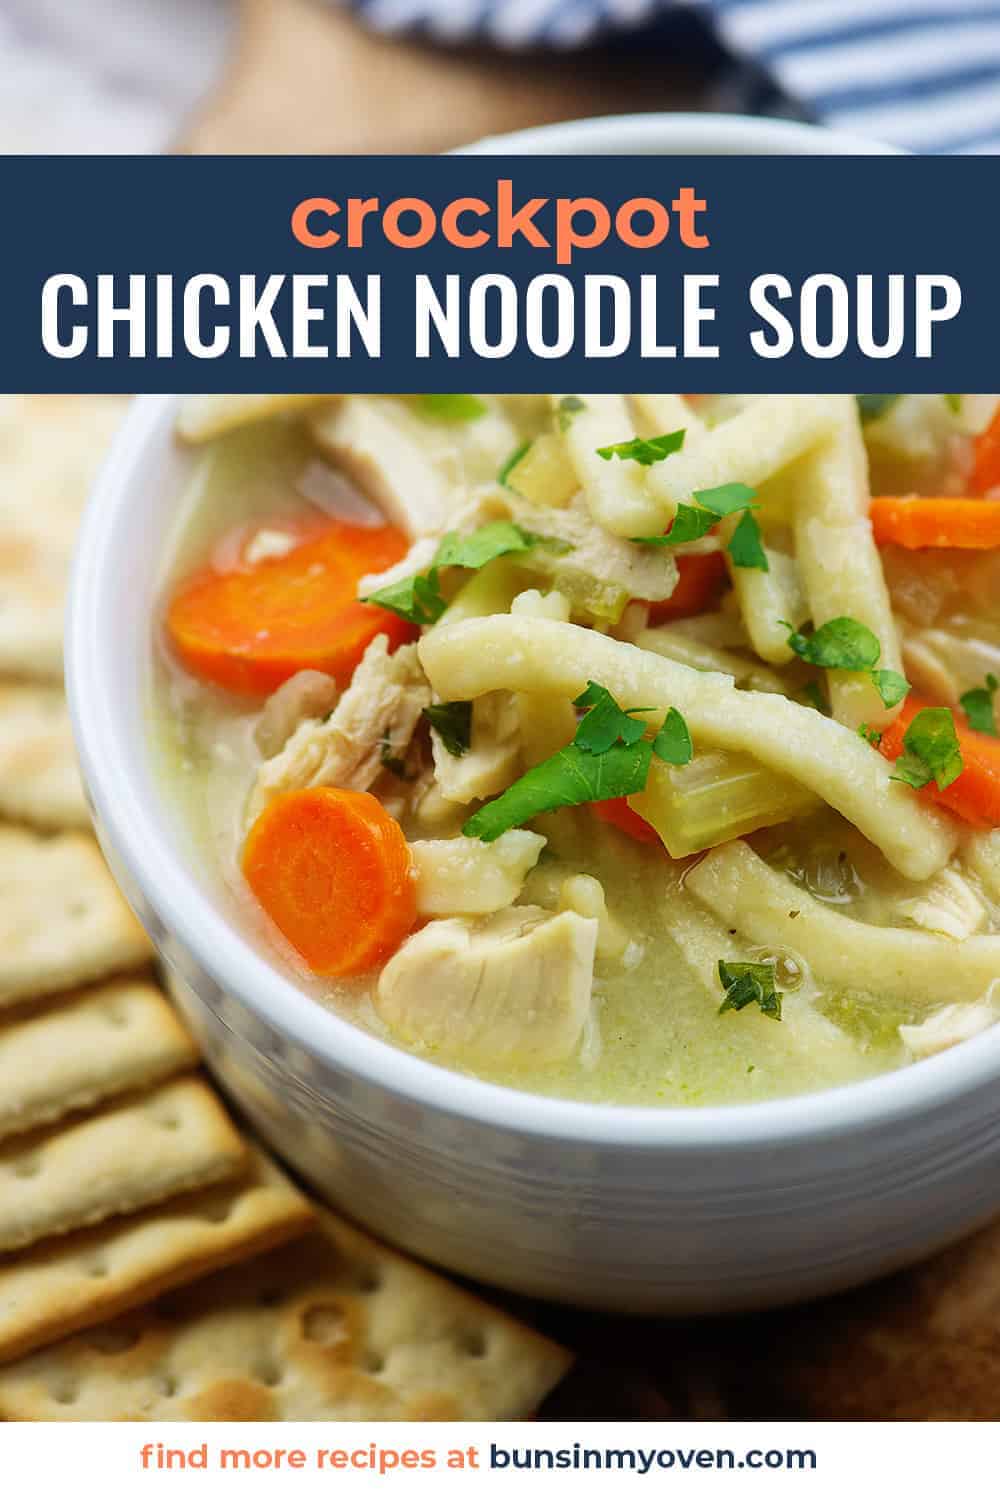 crockpot chicken noodle soup recipe in white bowl with crackers